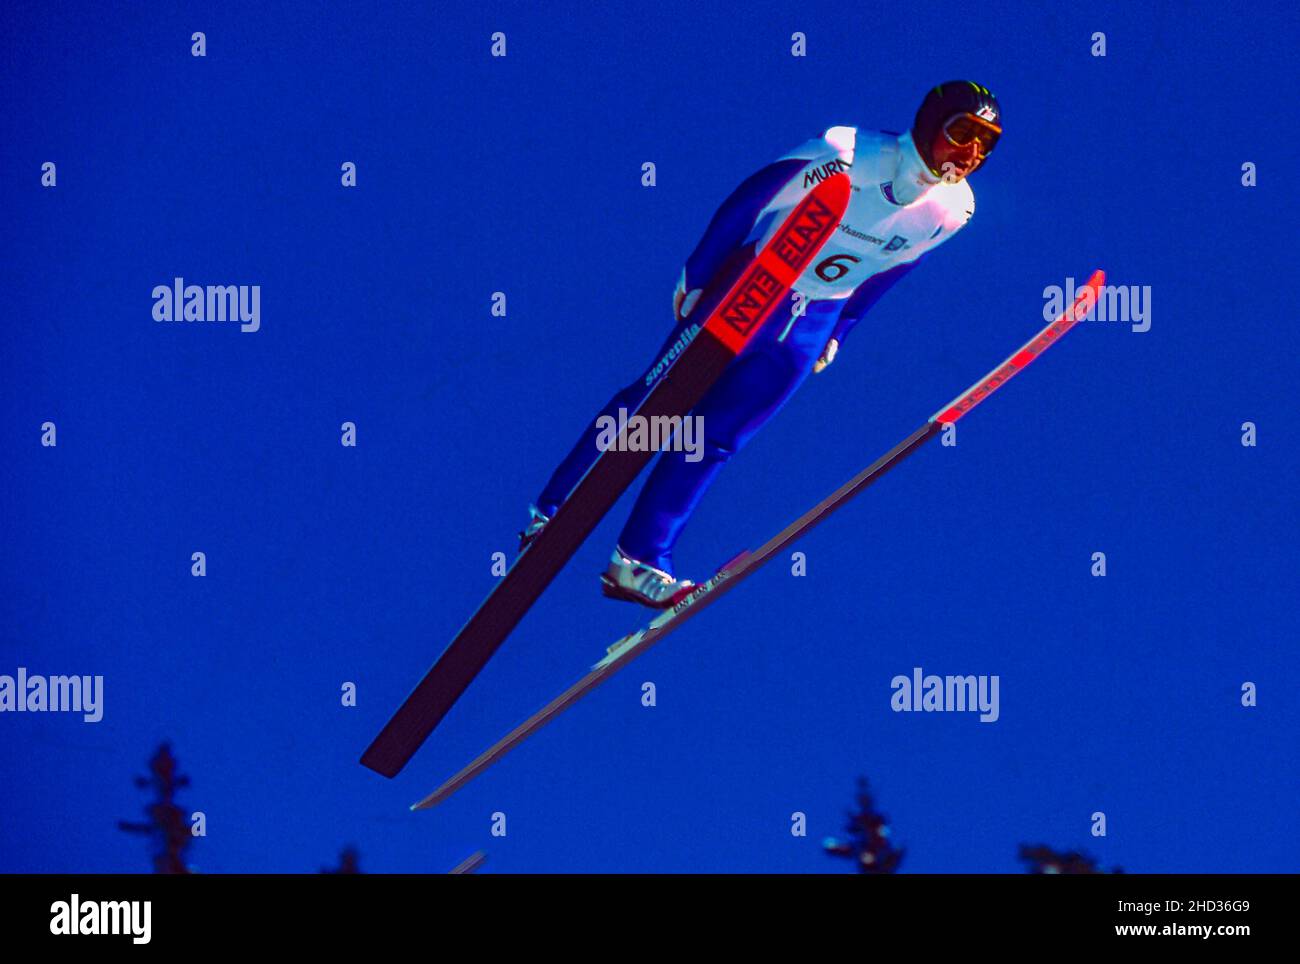 Franci Petek (SLO) competing in the Men's K120 individual ski jumping at the 1994 Olympic Winter Games Stock Photo